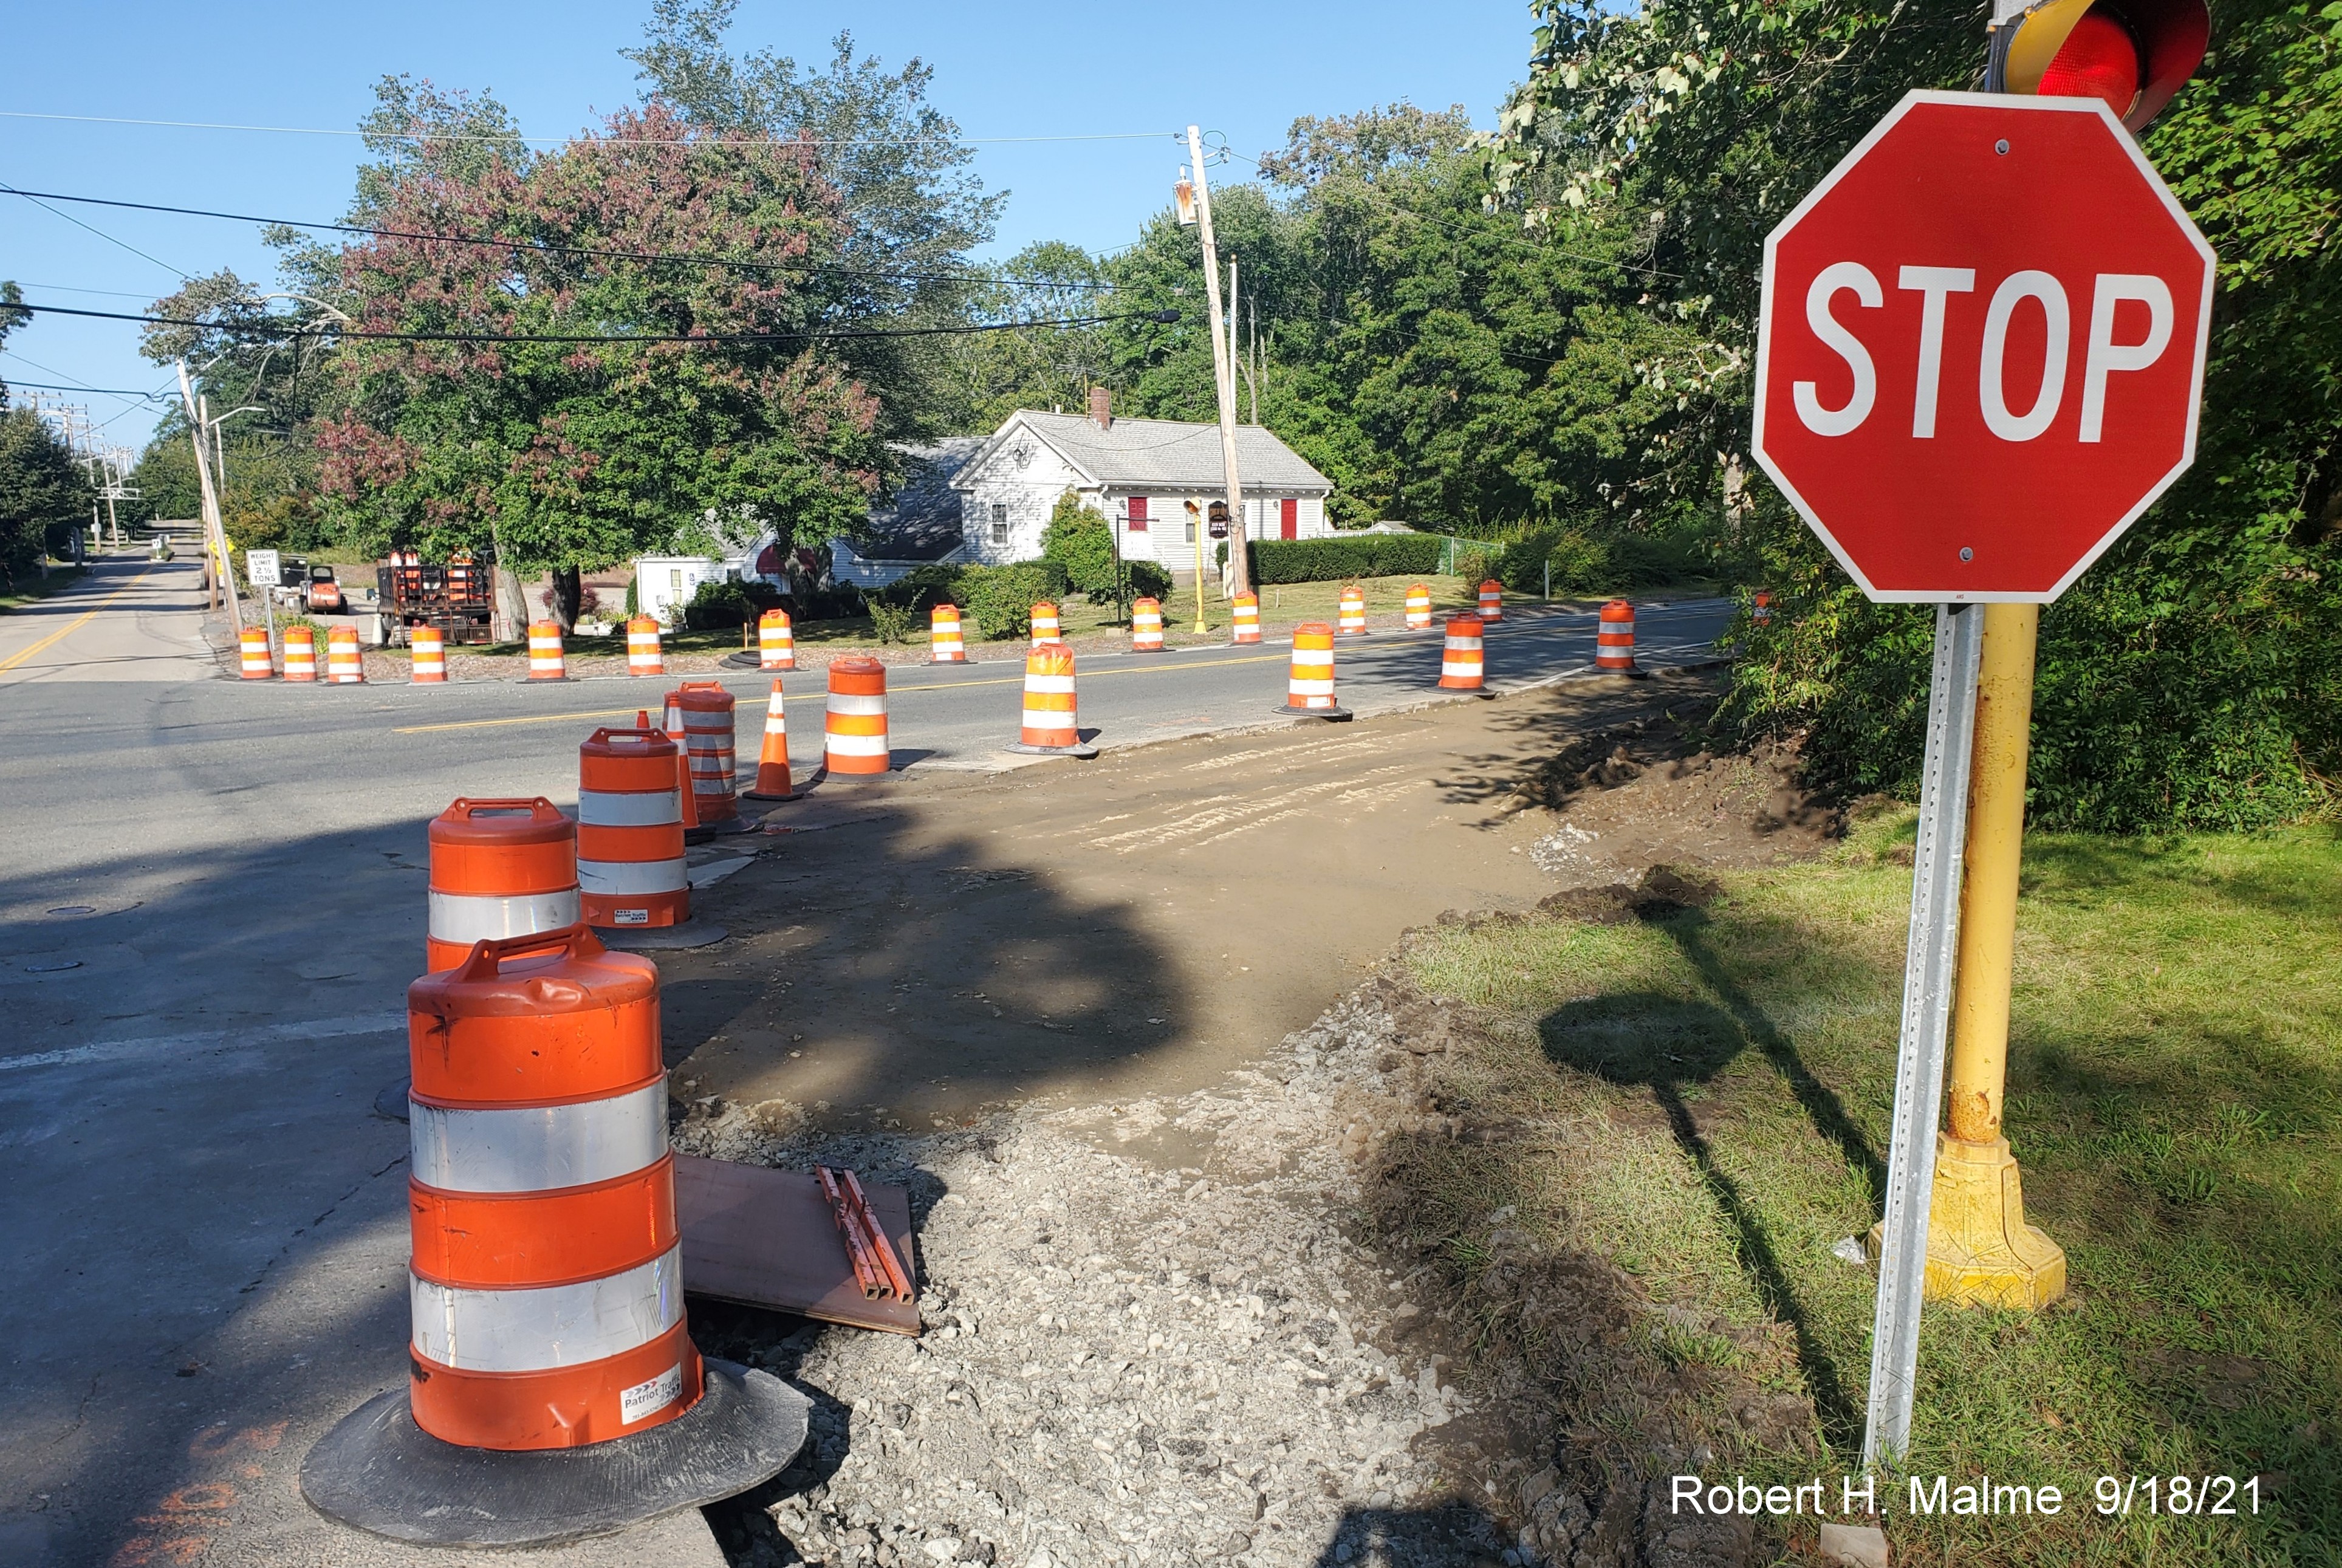 Image of intersection of Kilby Street and MA 3A South in Hingham prior to substantial reconstruction, September 2021